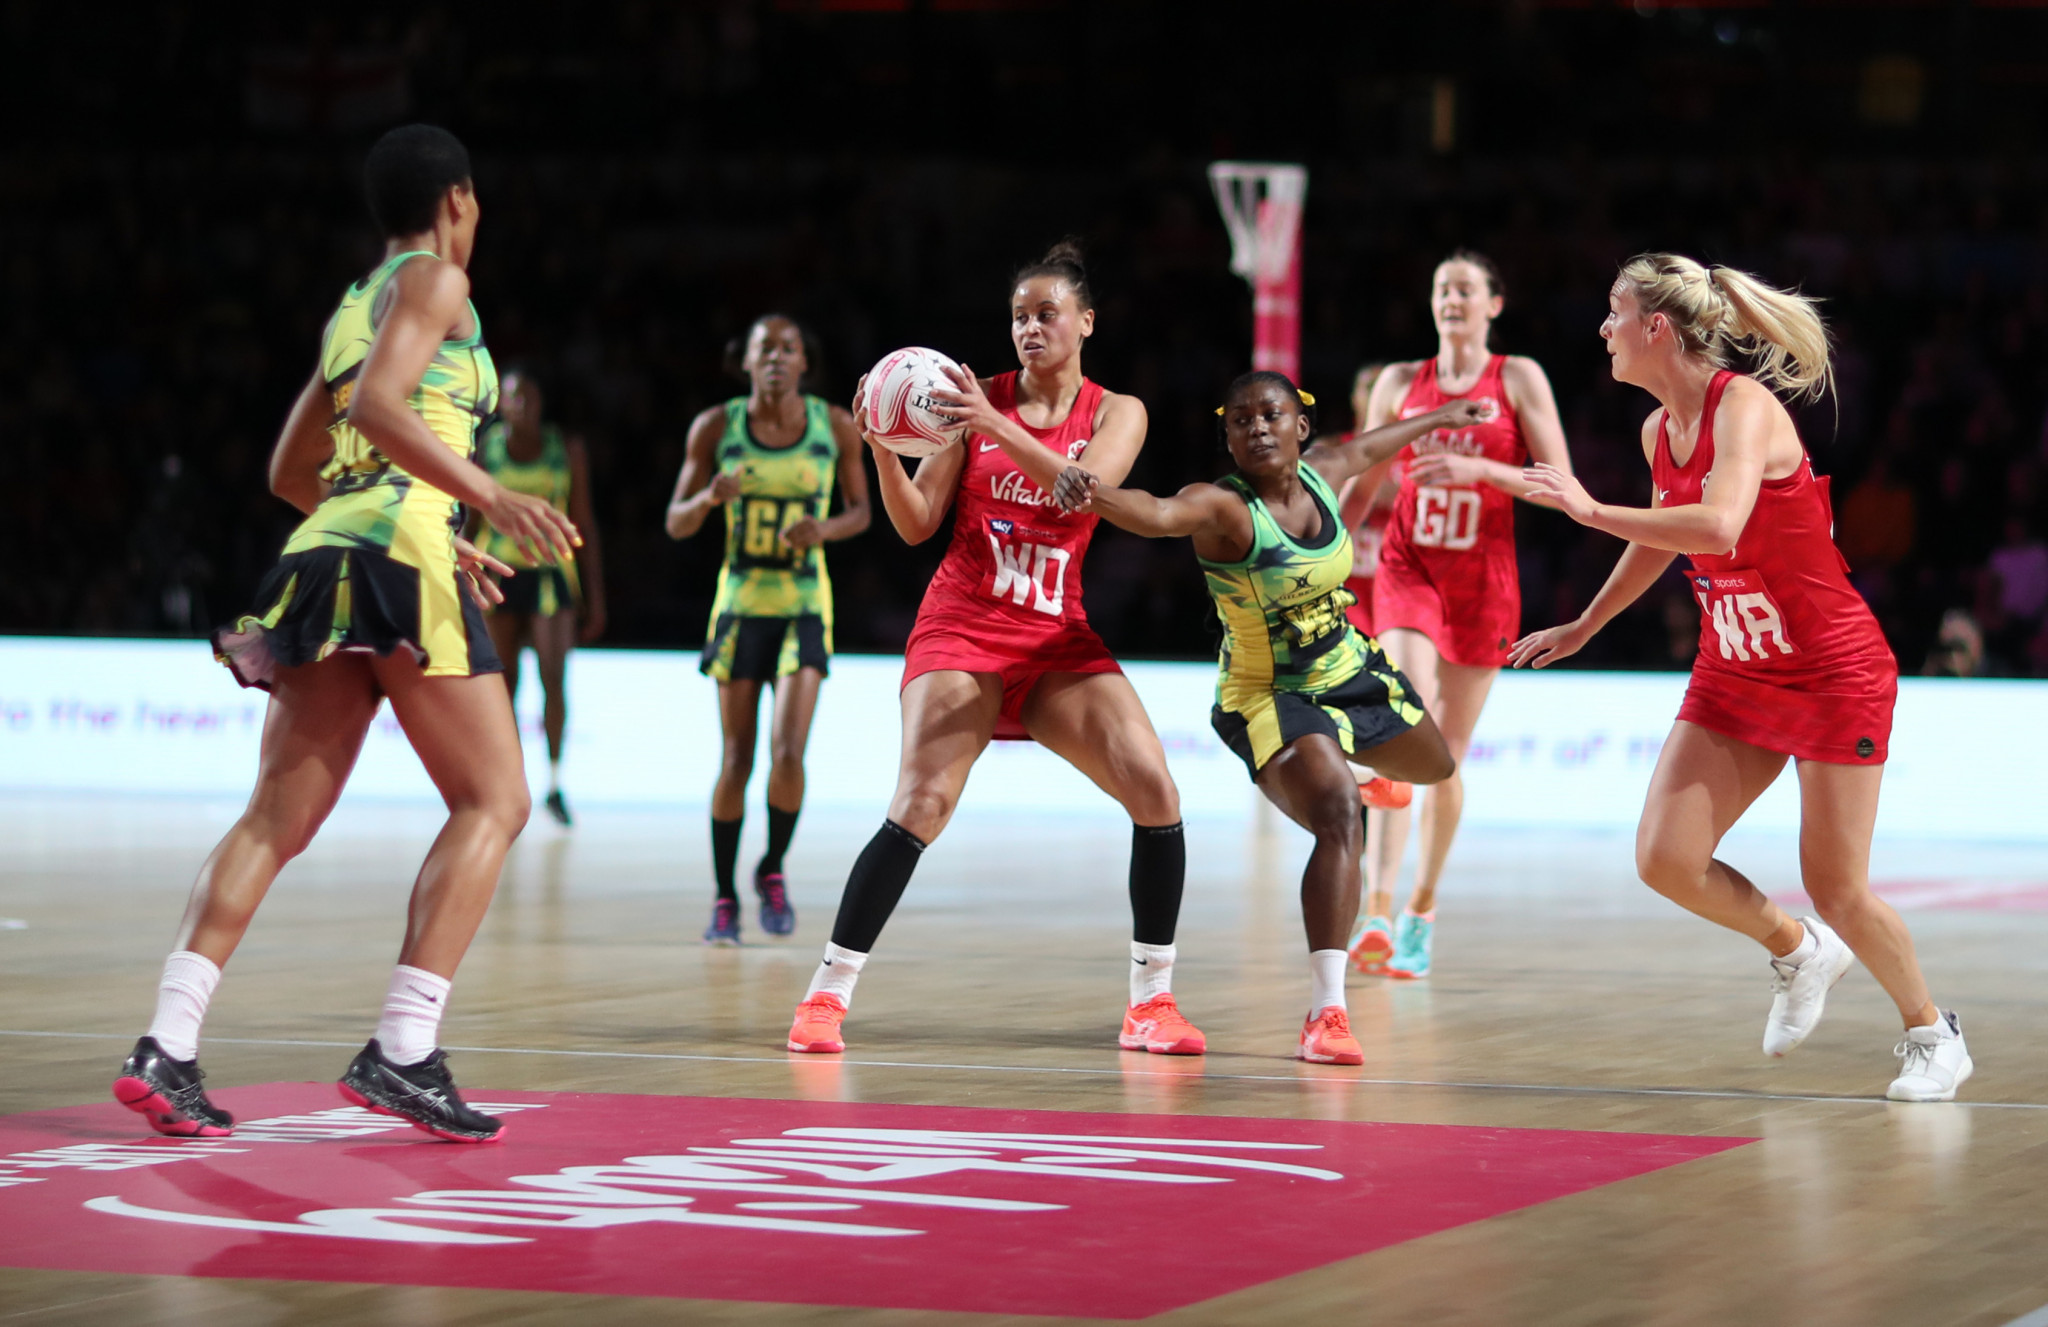 Jamaica's four-game netball tour of England has been cancelled due to the COVID-19 pandemic ©Getty Images